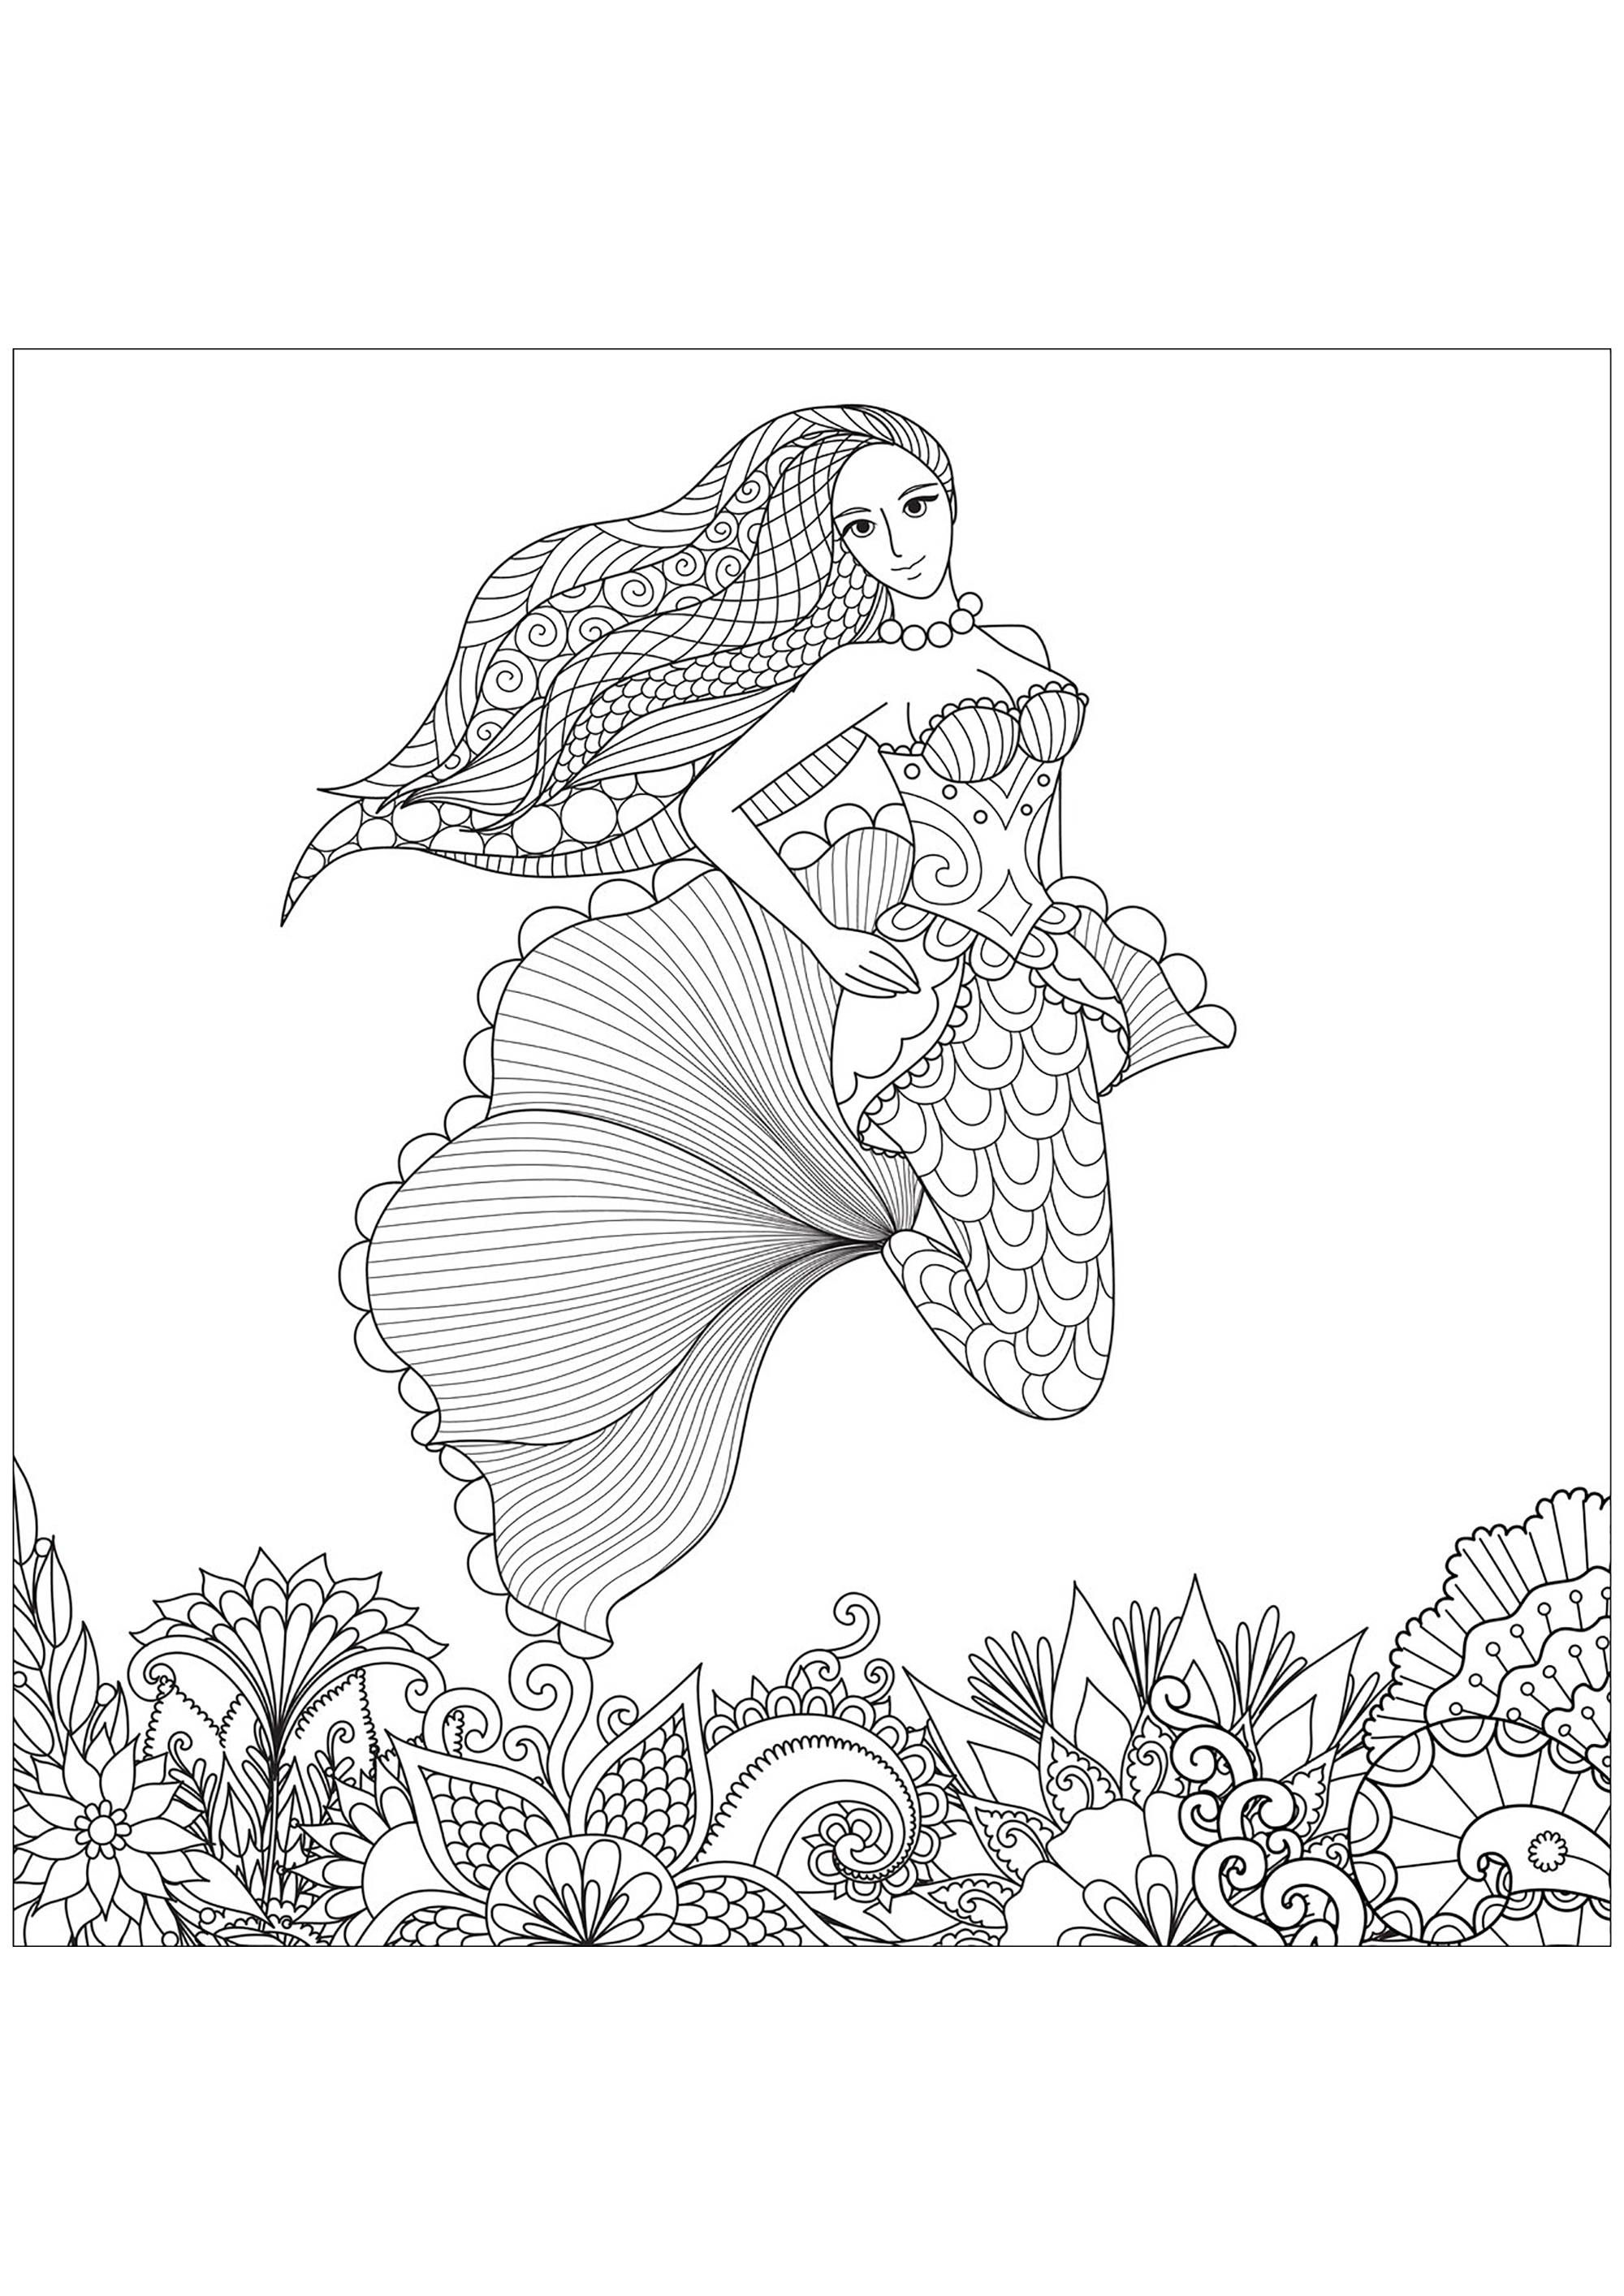 Pretty mermaid with beautiful patterns in her hair, and seabed drawn with Zentangles, Source : 123rf   Artist : Bimdeedee